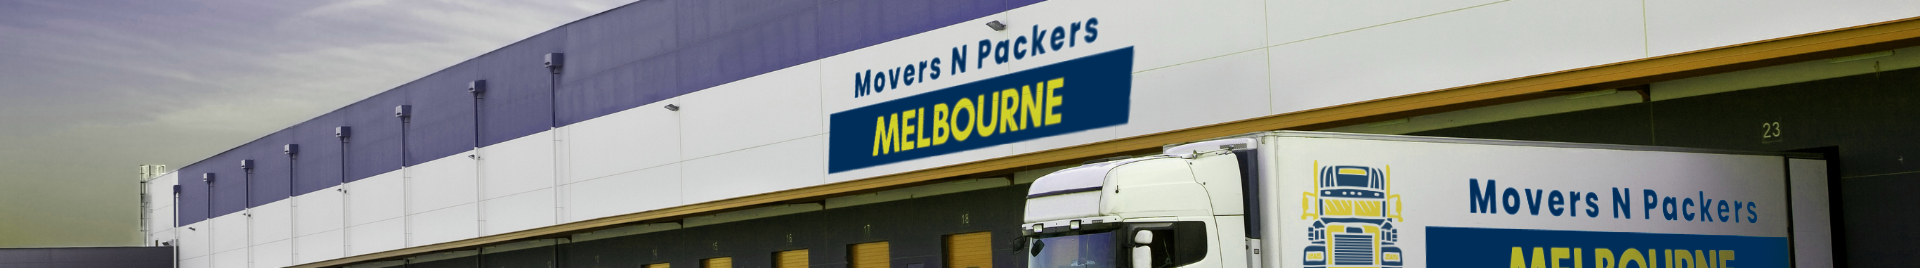 Profil-Banner von Movers N Packers Melbourne